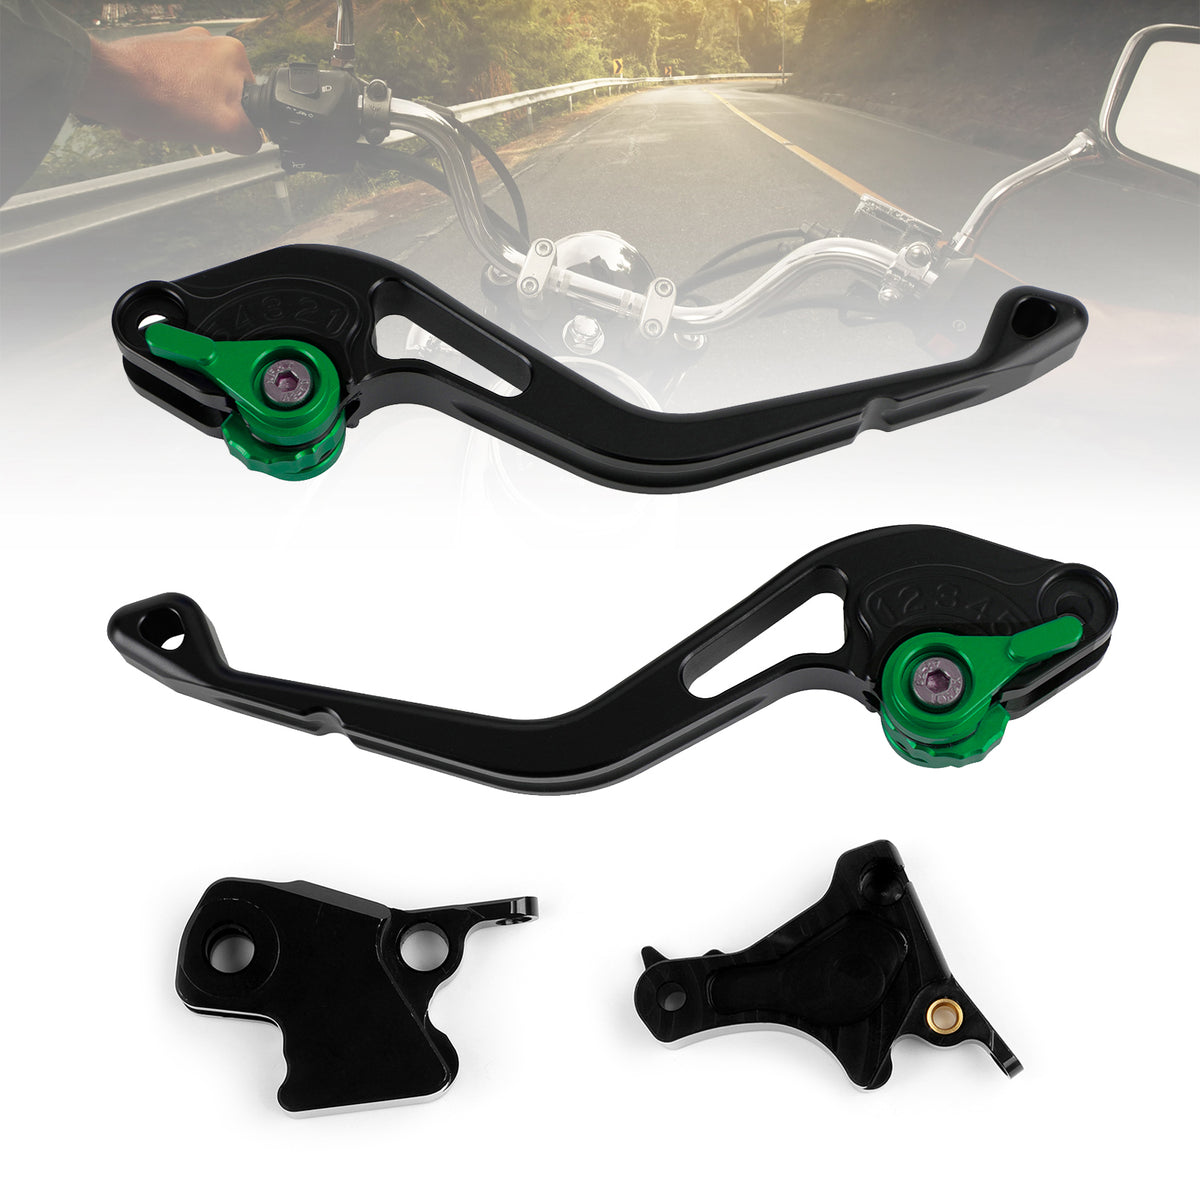 NEW Short Clutch Brake Lever fit for BMW F650GS F700GS F800S F800ST F800GT